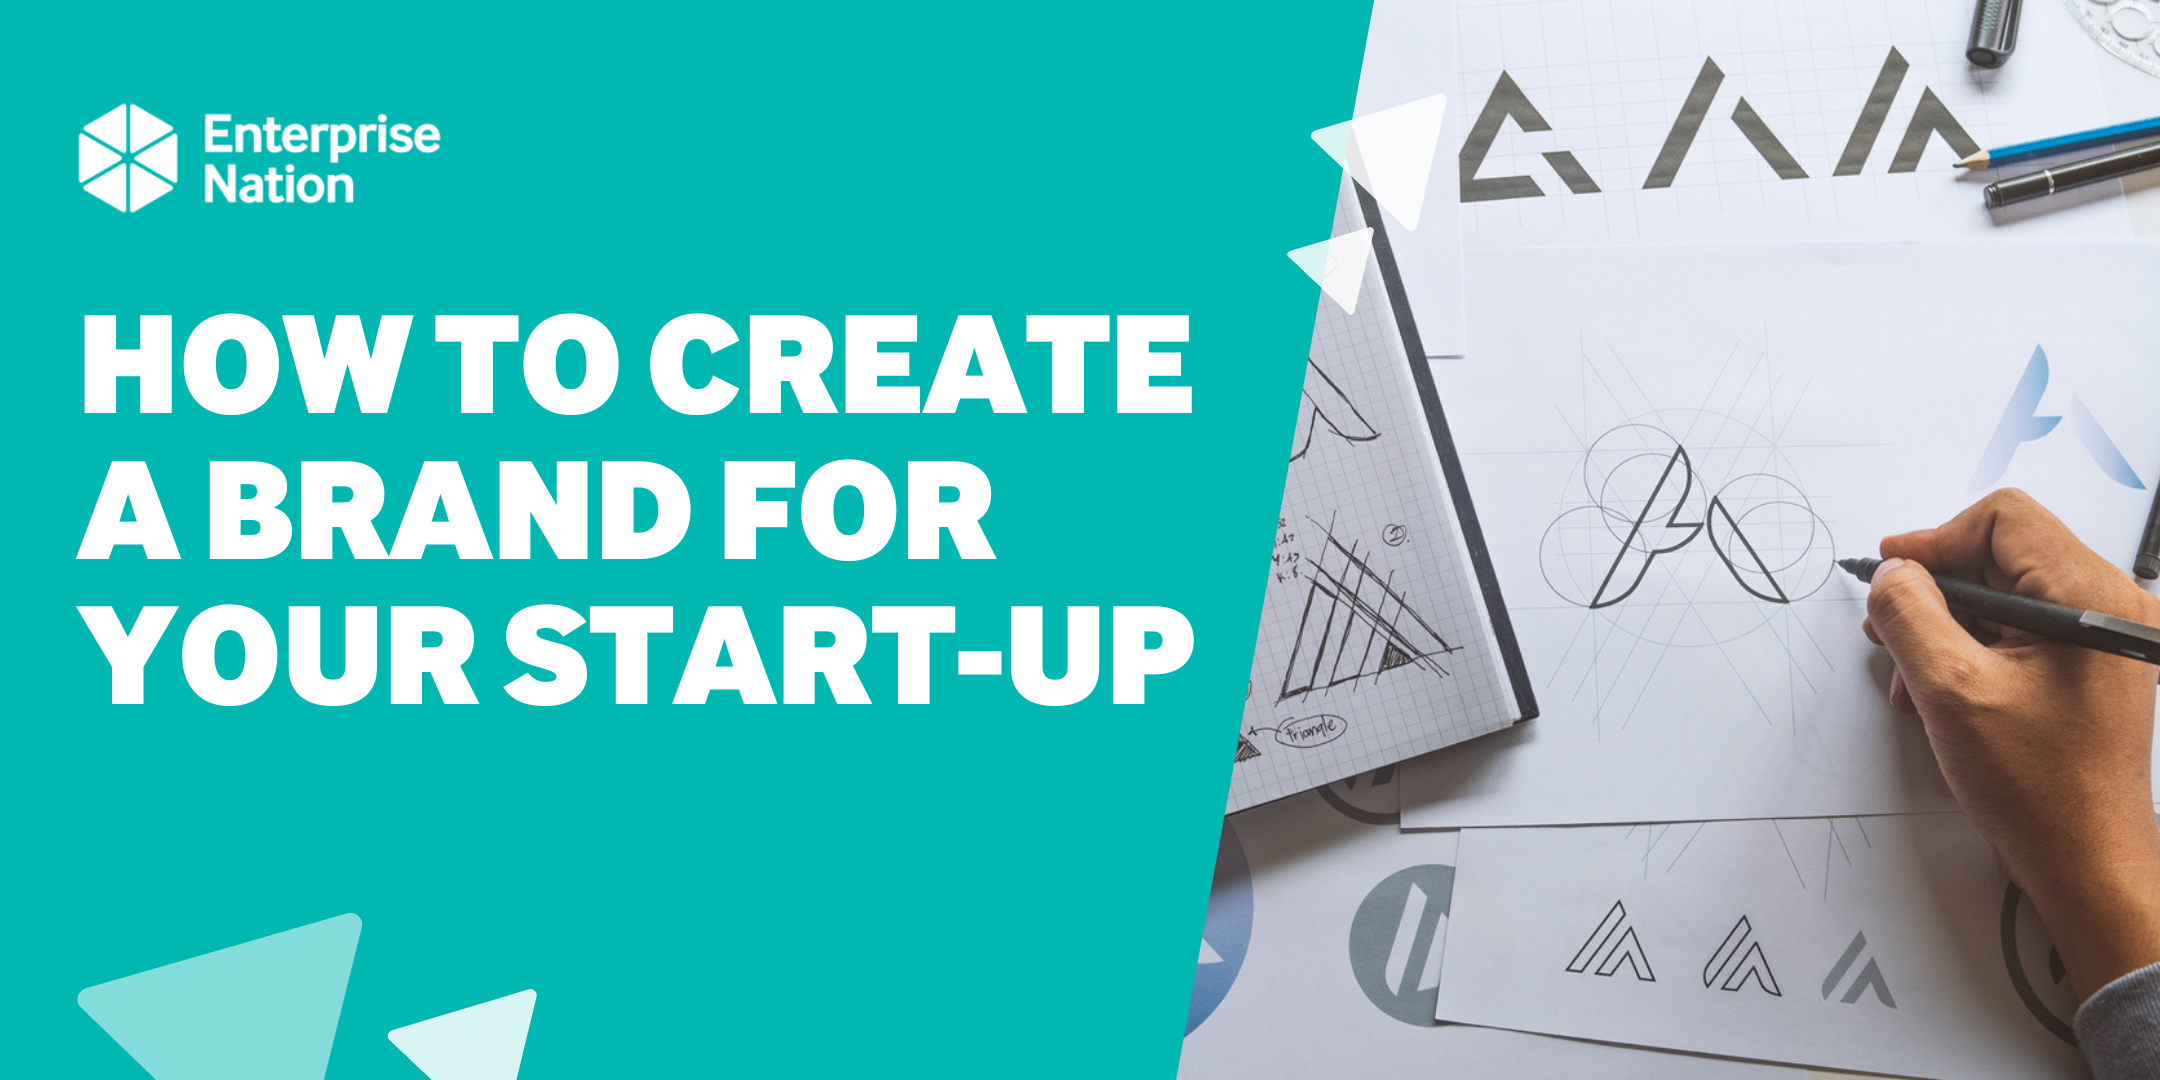 How to create a brand for your start-up